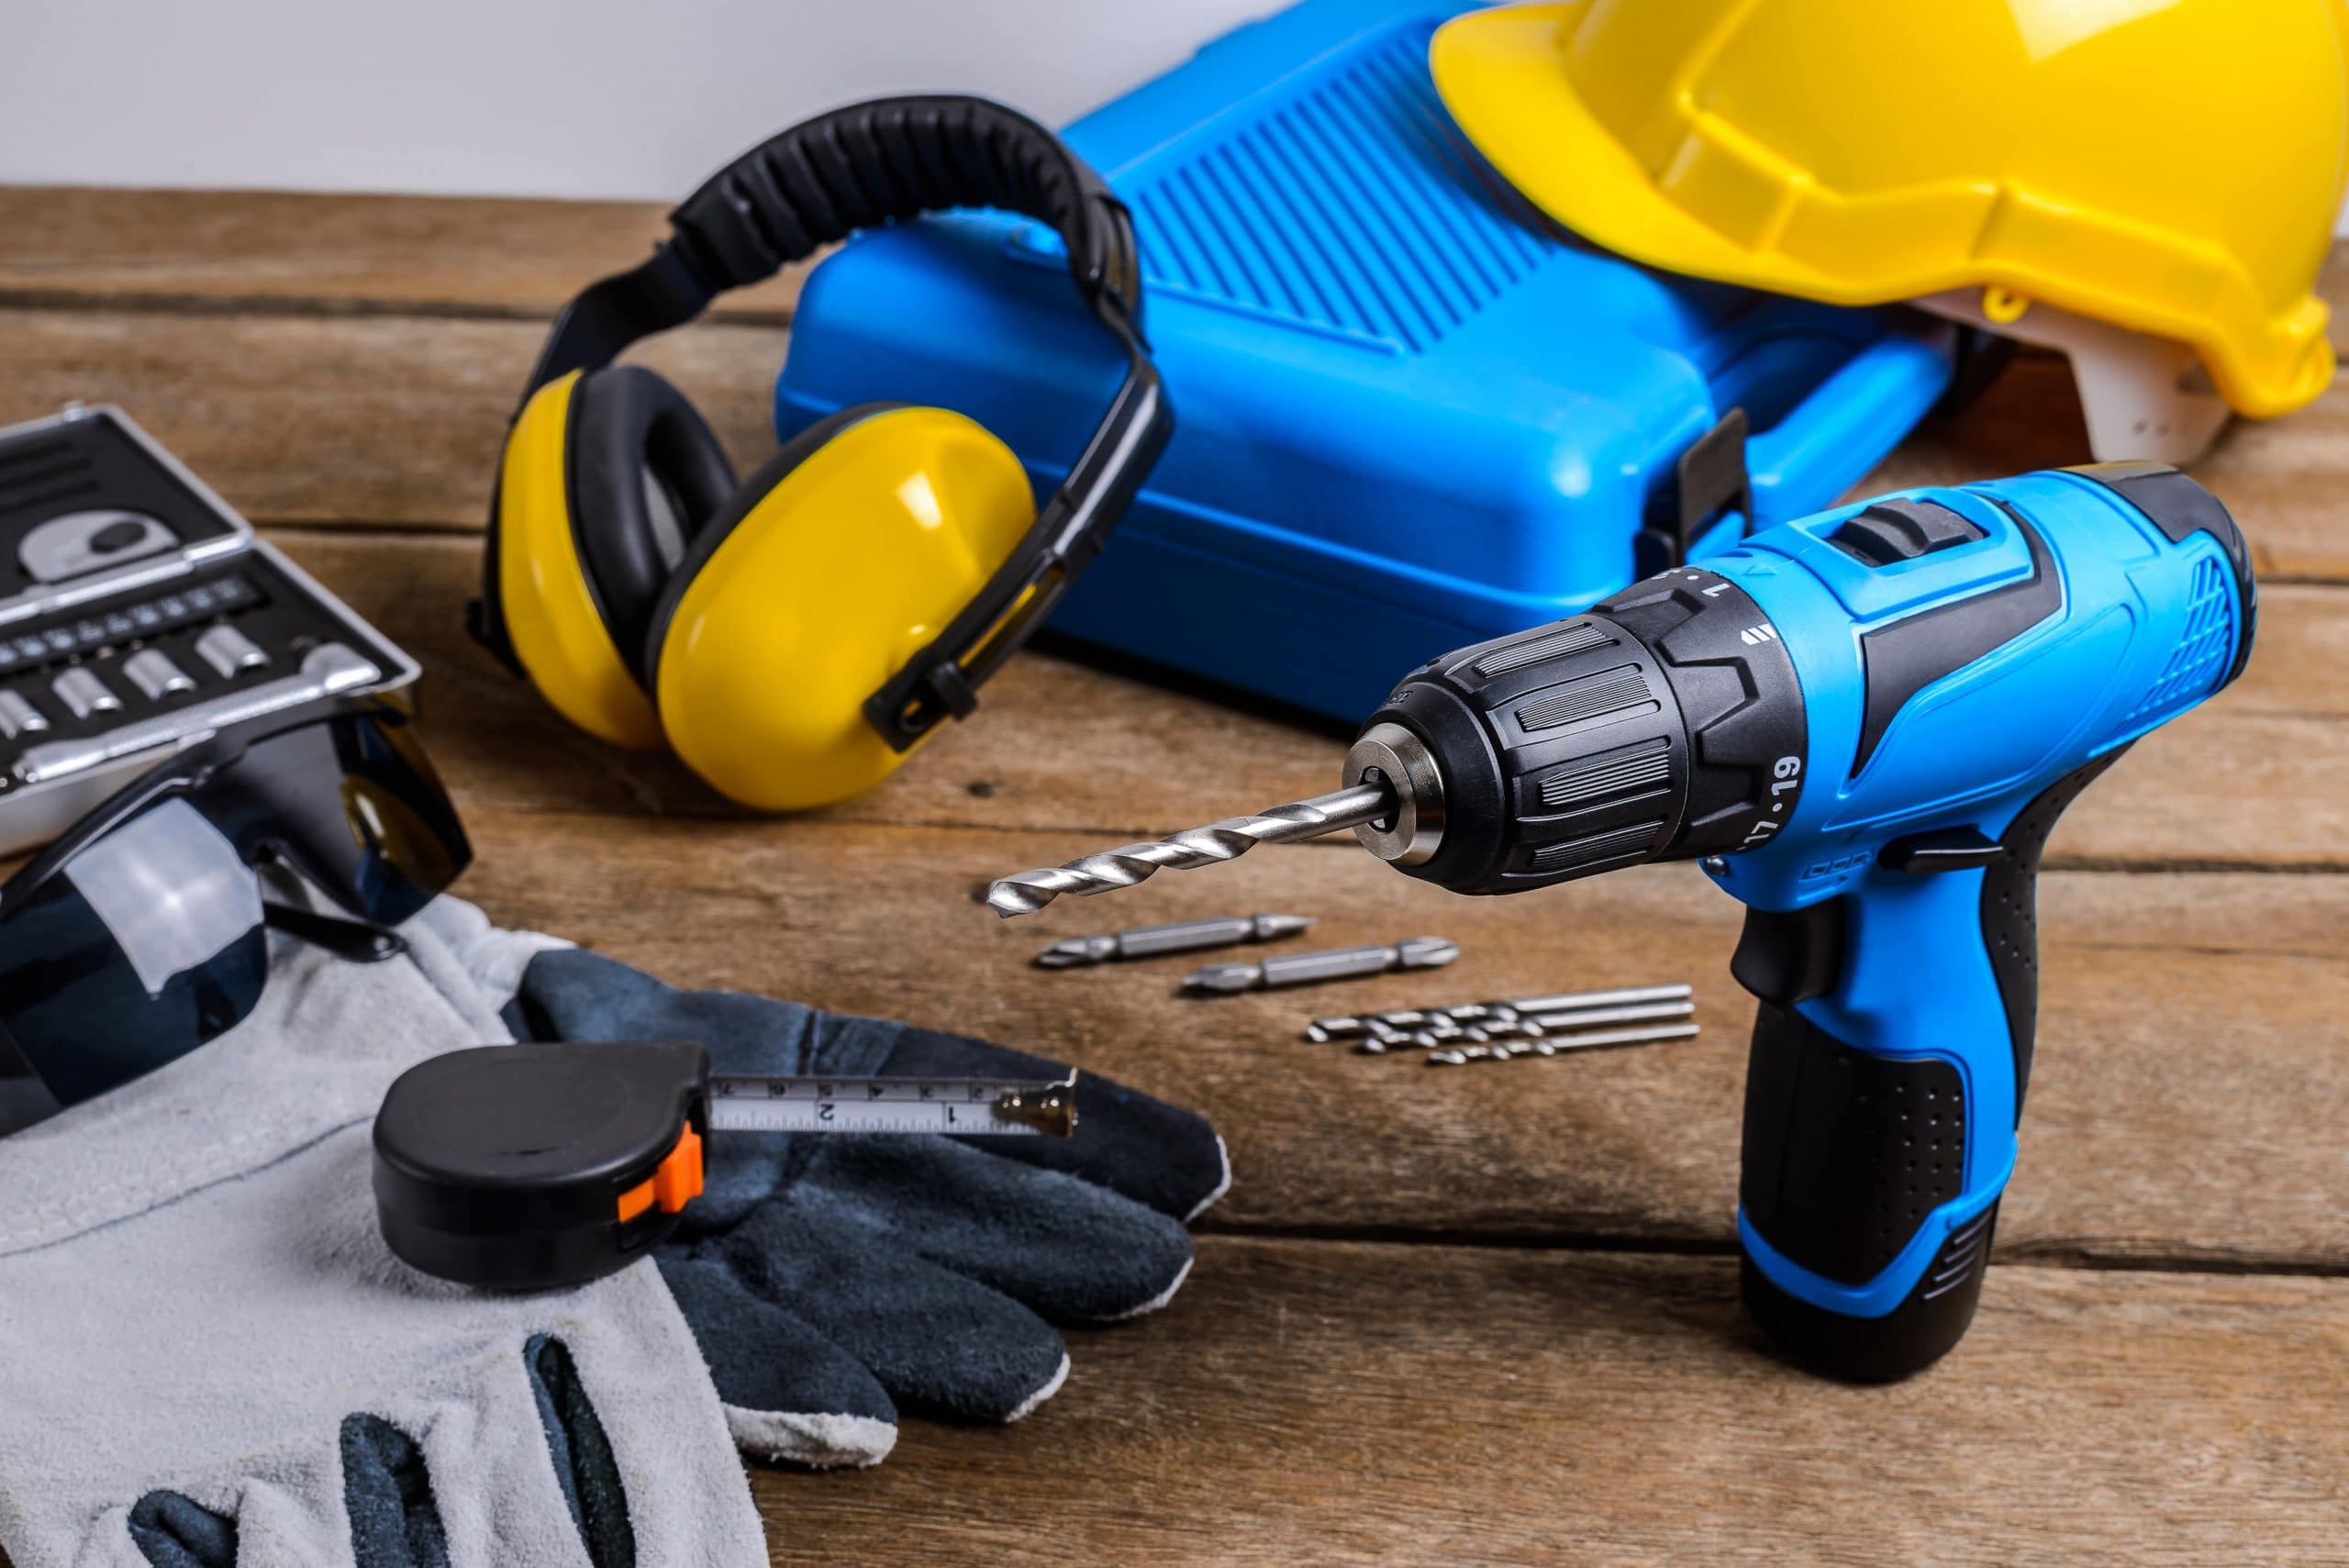 What Is The Best Way To Protect Yourself From Getting Caught In Power Tools